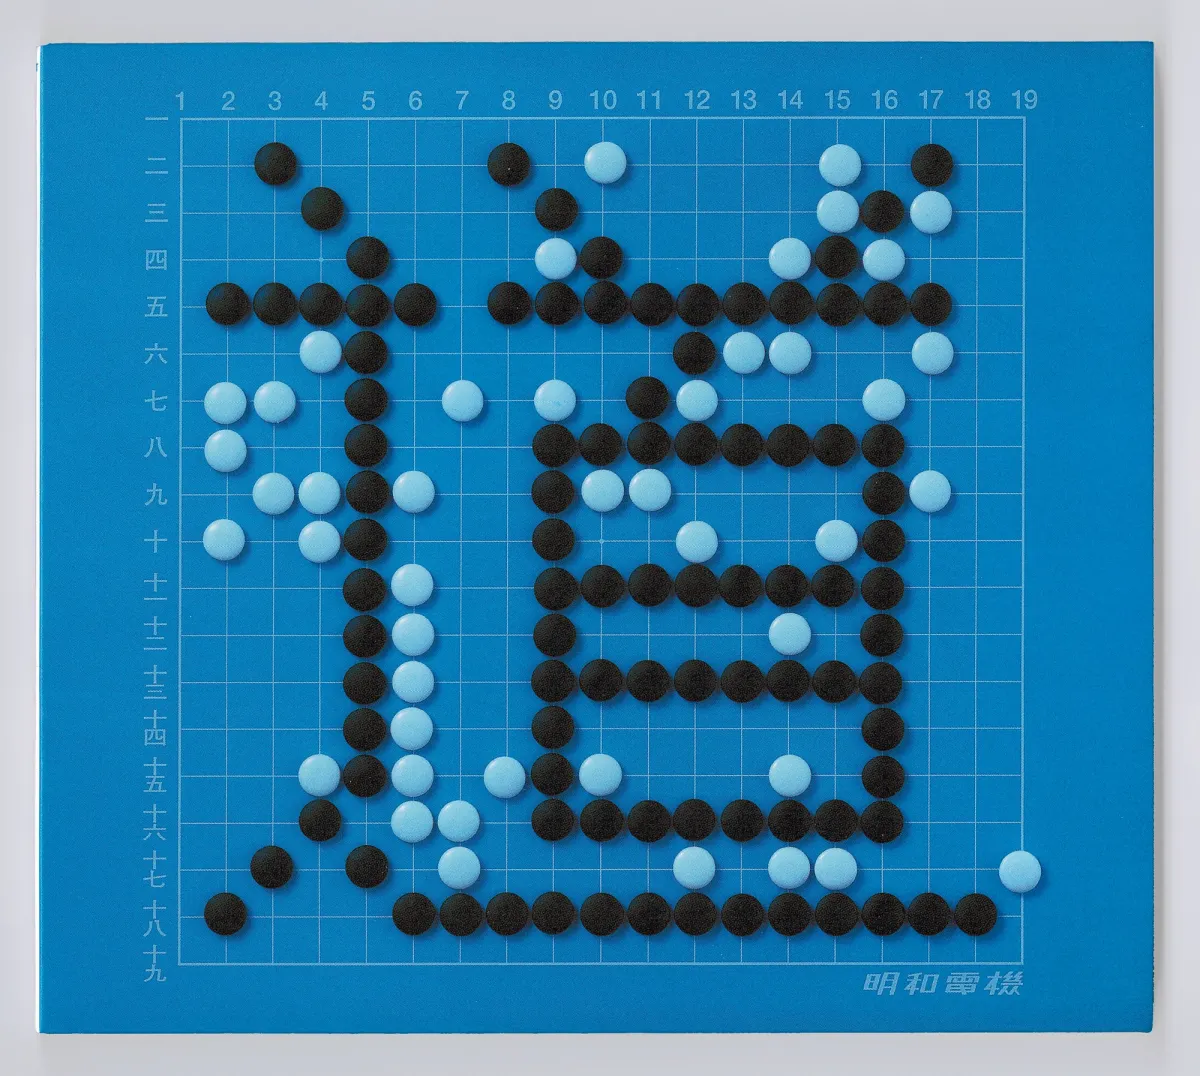 A CD cover, displaying a blue and black Japanese character constructed by round dots arranged on a blue graph background.